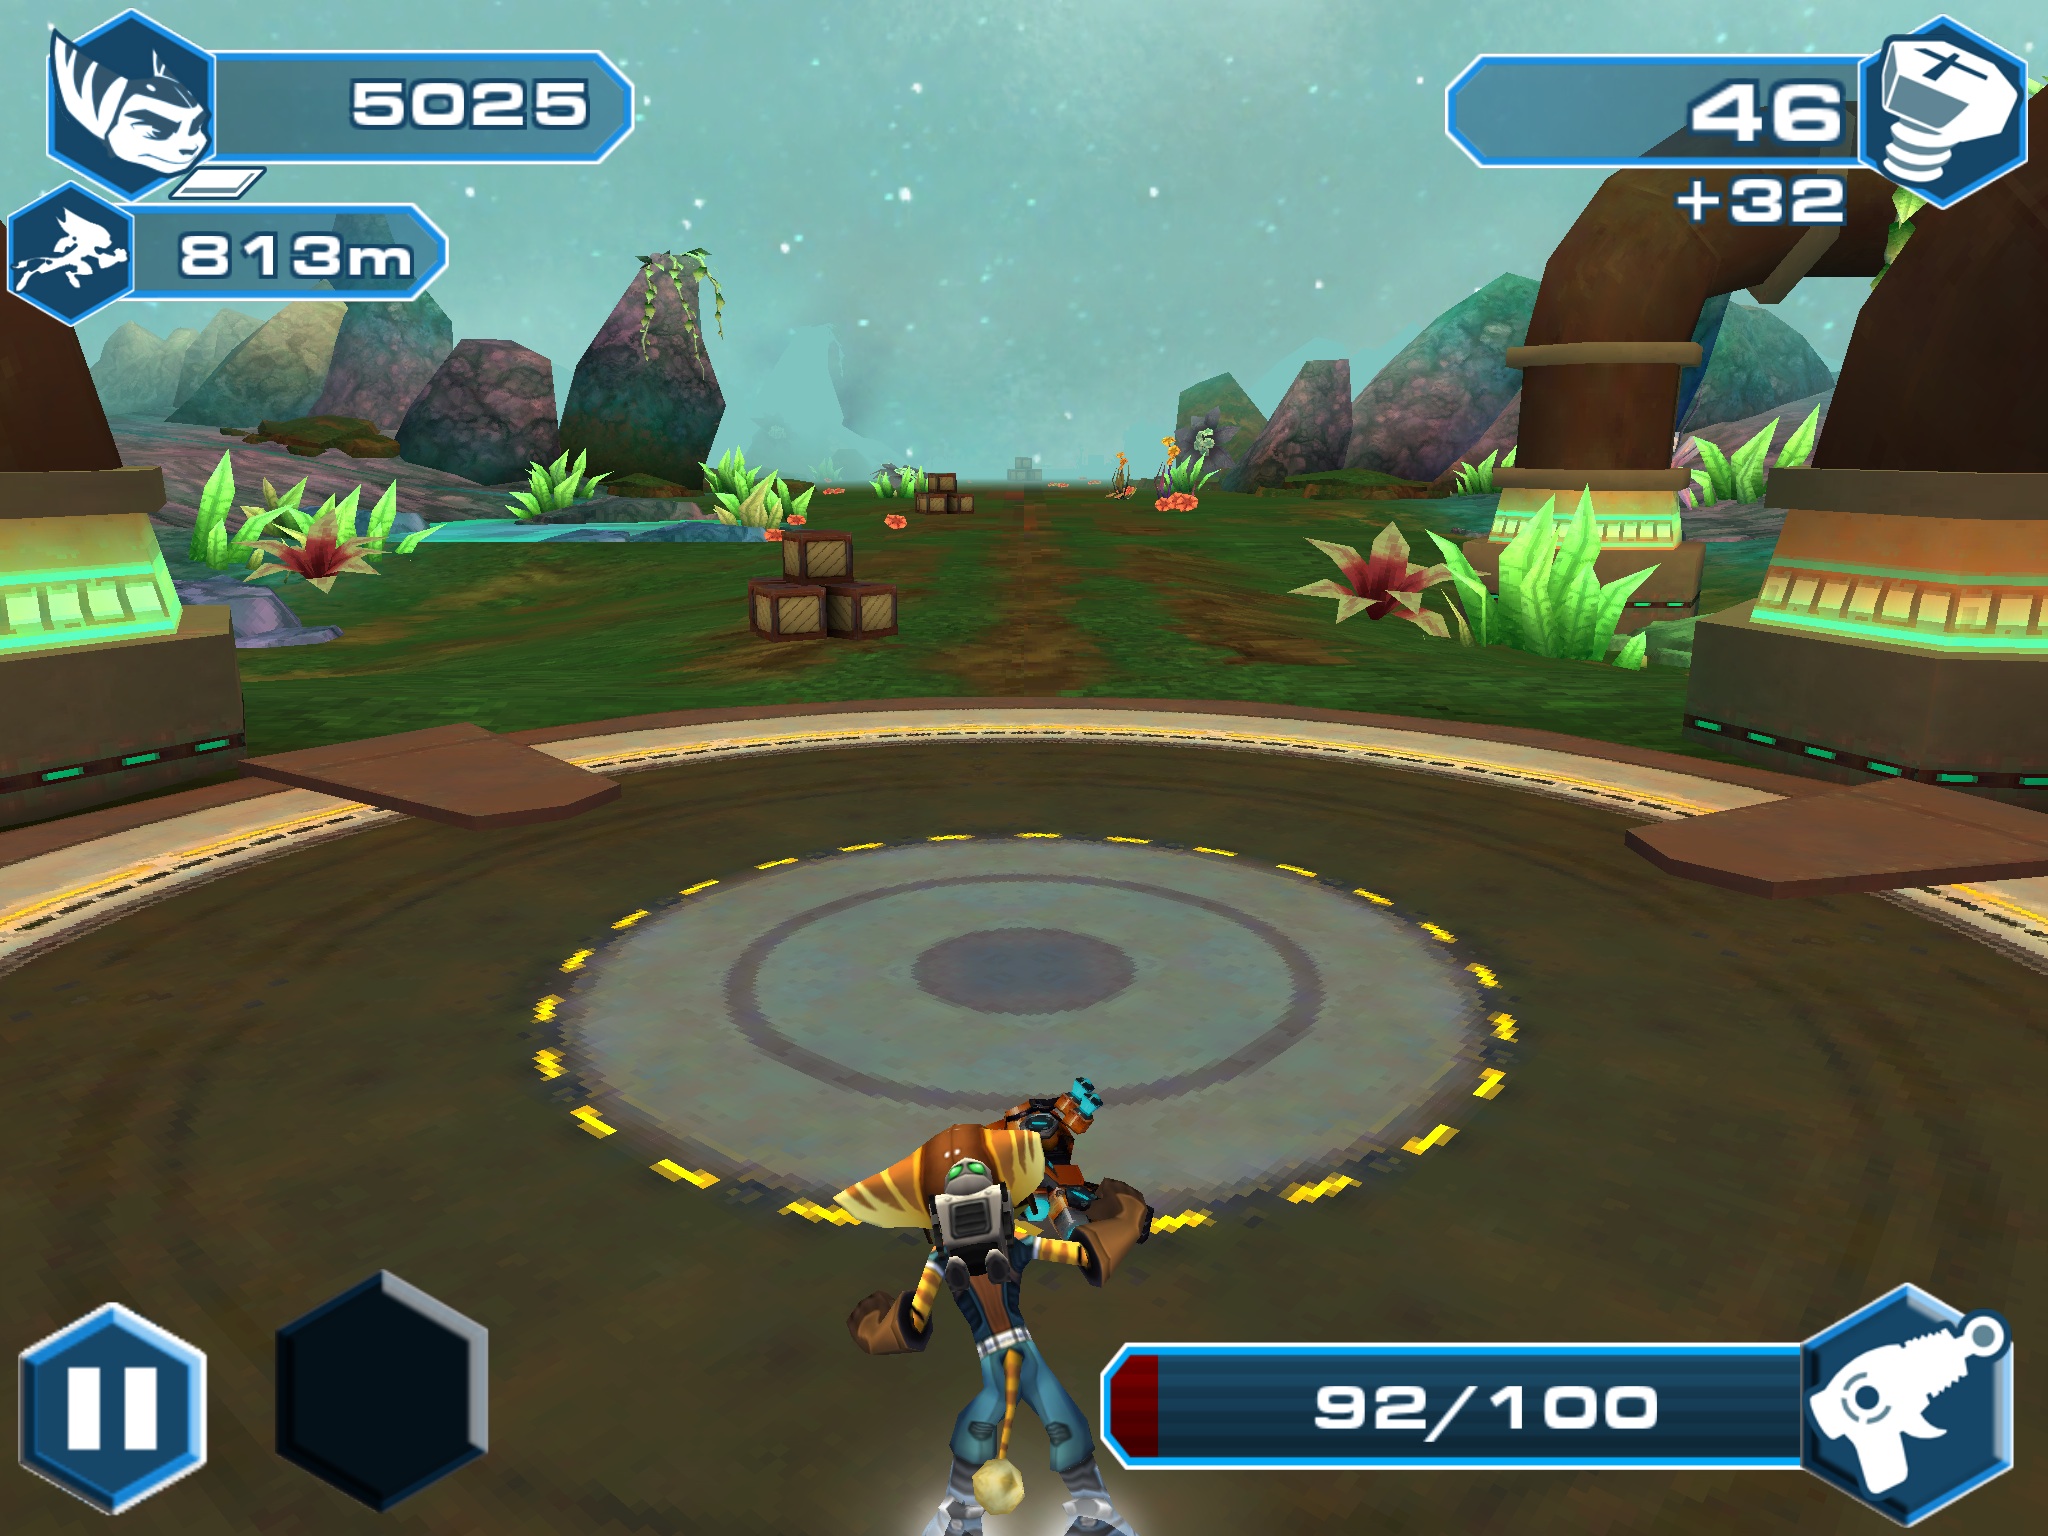 There’s A Ratchet & Clank Endless Runner For Mobile. Huh.